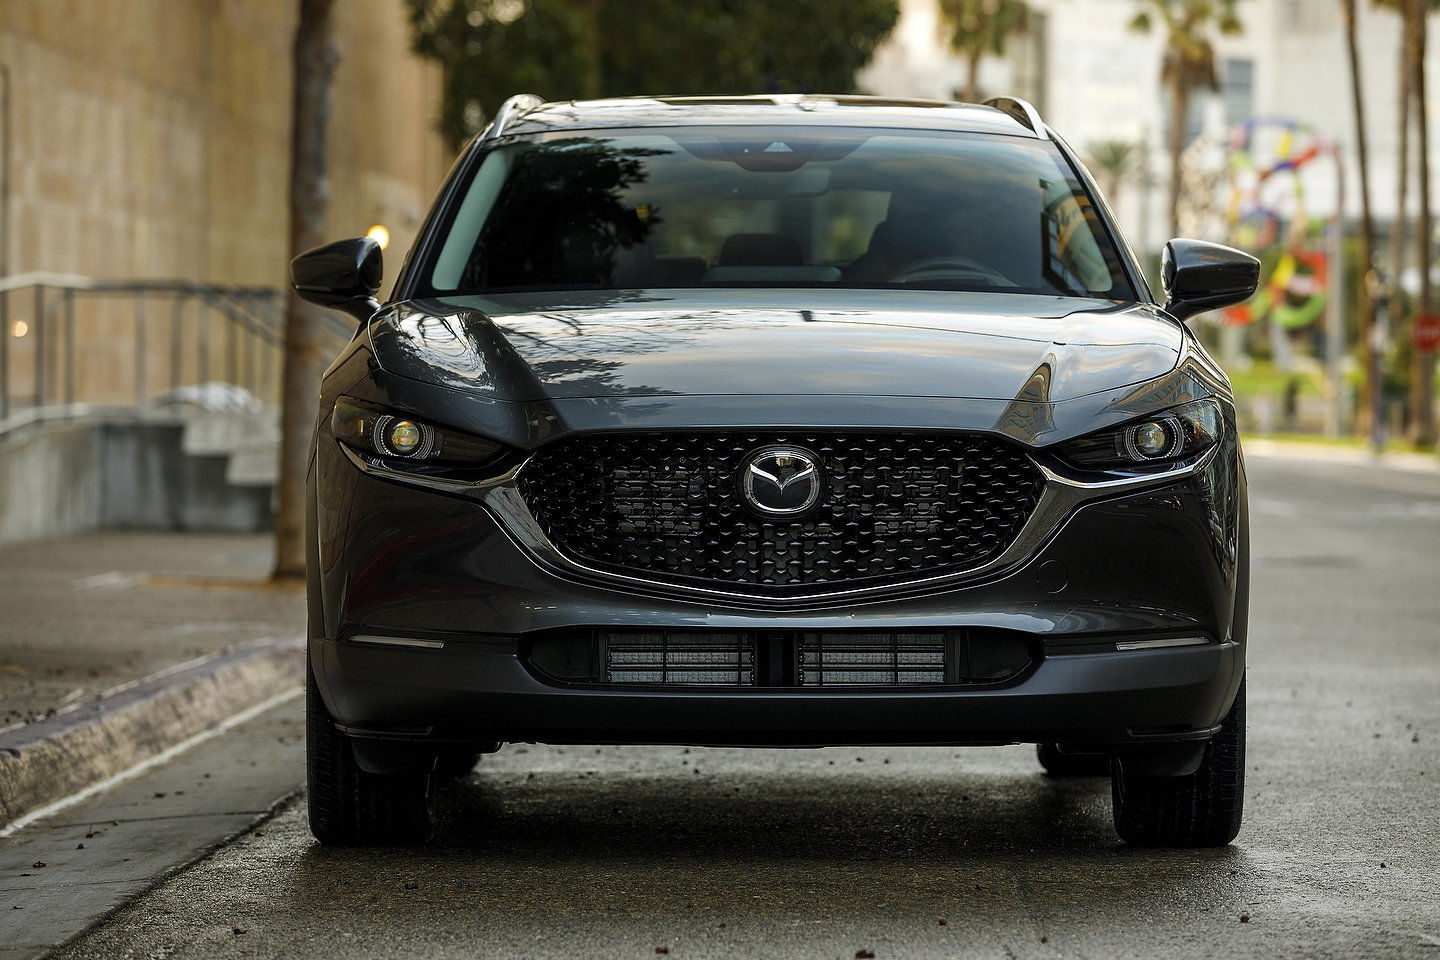 Mazda owners payment assistance information and deals for new Mazda buyers